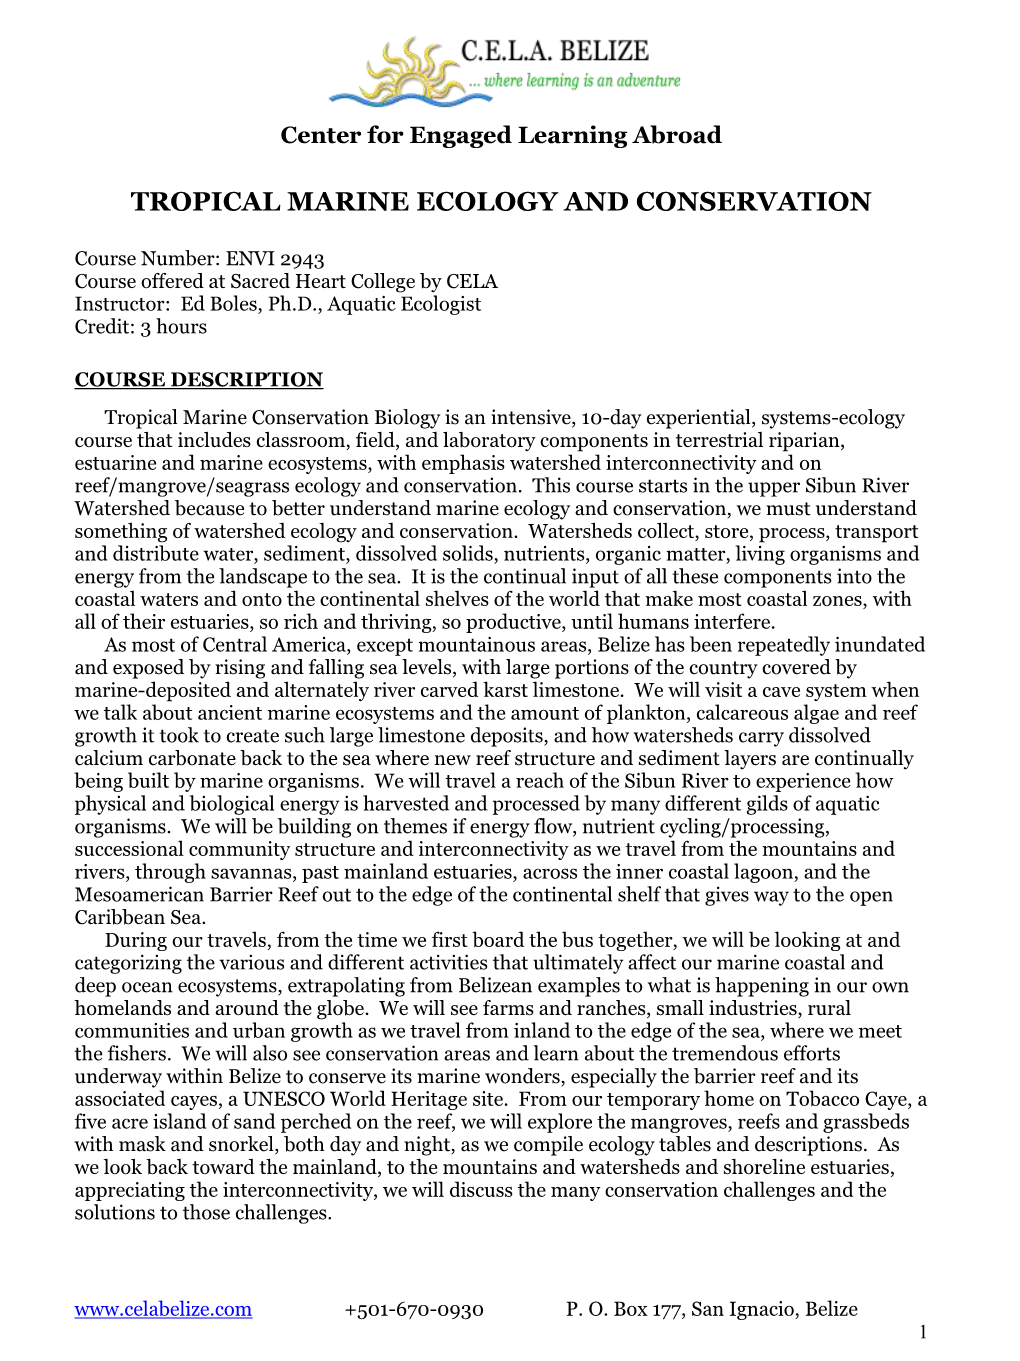 Tropical Marine Ecology and Conservation